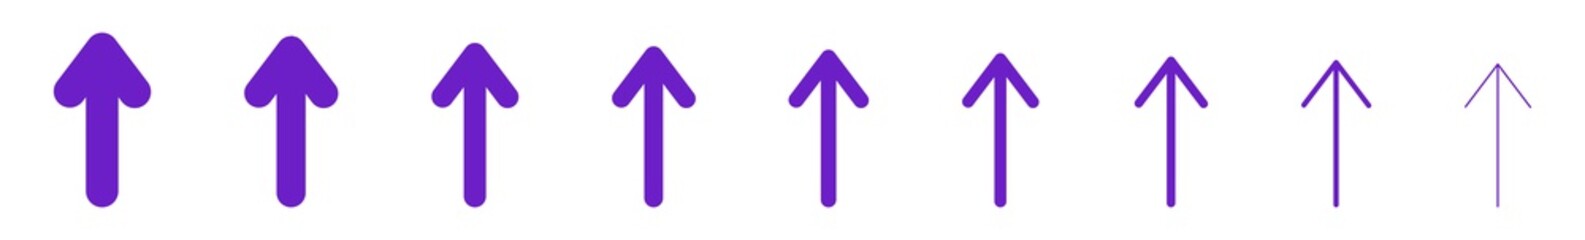 Arrow Icon Purple | Arrows | Infographic Illustration | Direction Symbol | Pointer Logo | Up Sign | Isolated | Variations